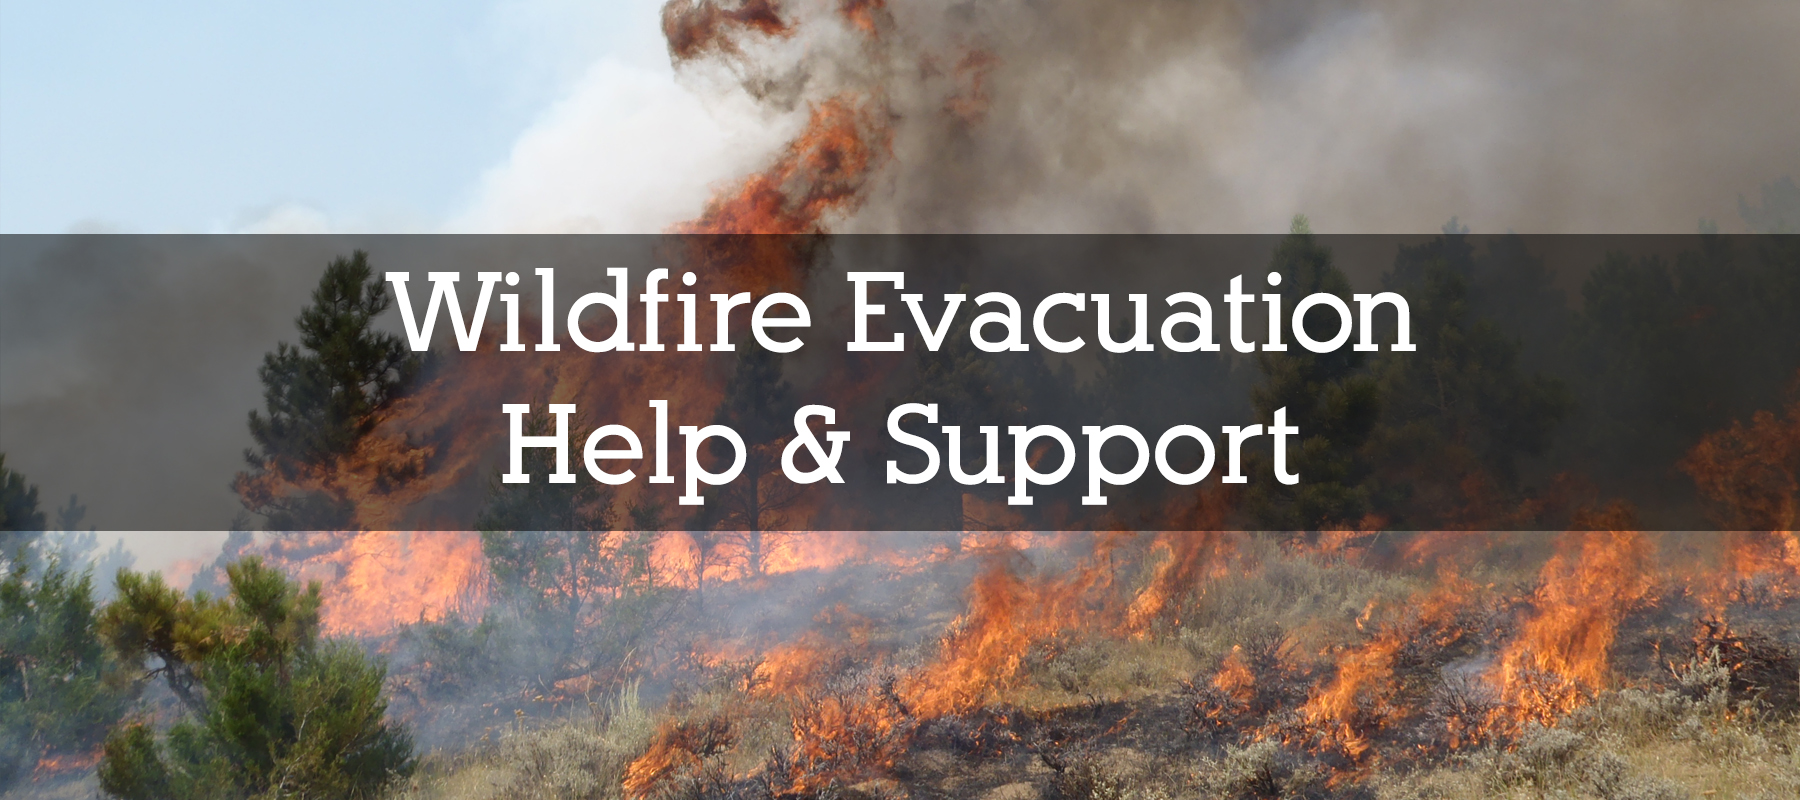 Stay Updated on Colorado Wildfire Evacuations